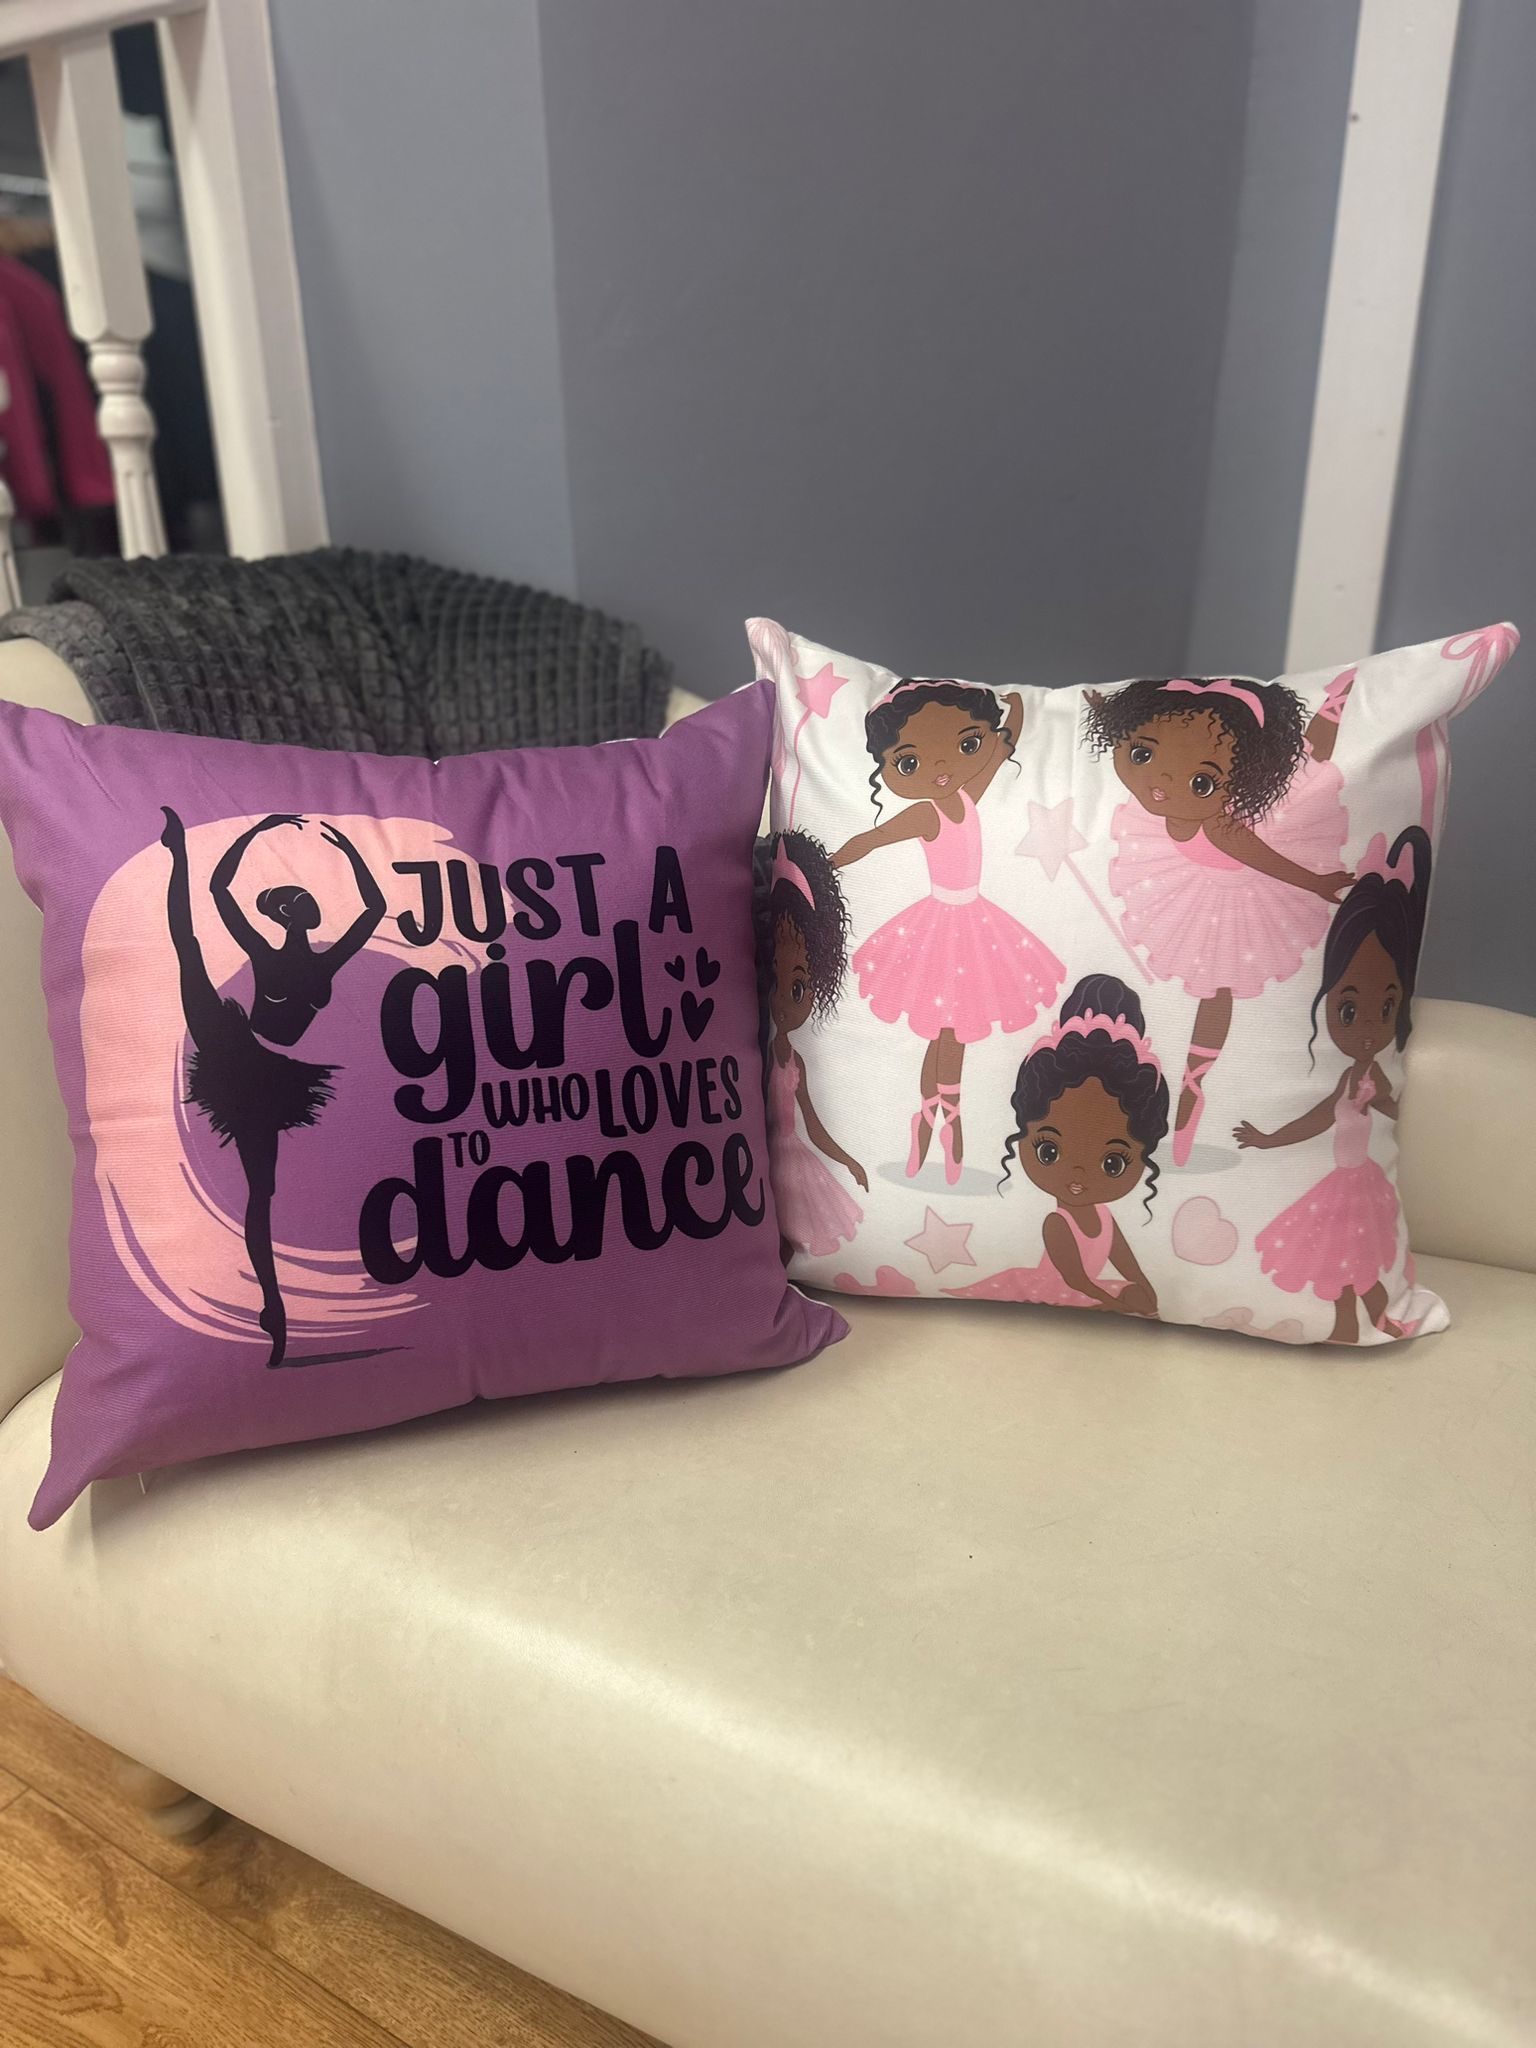 Darcies Dance World has launched